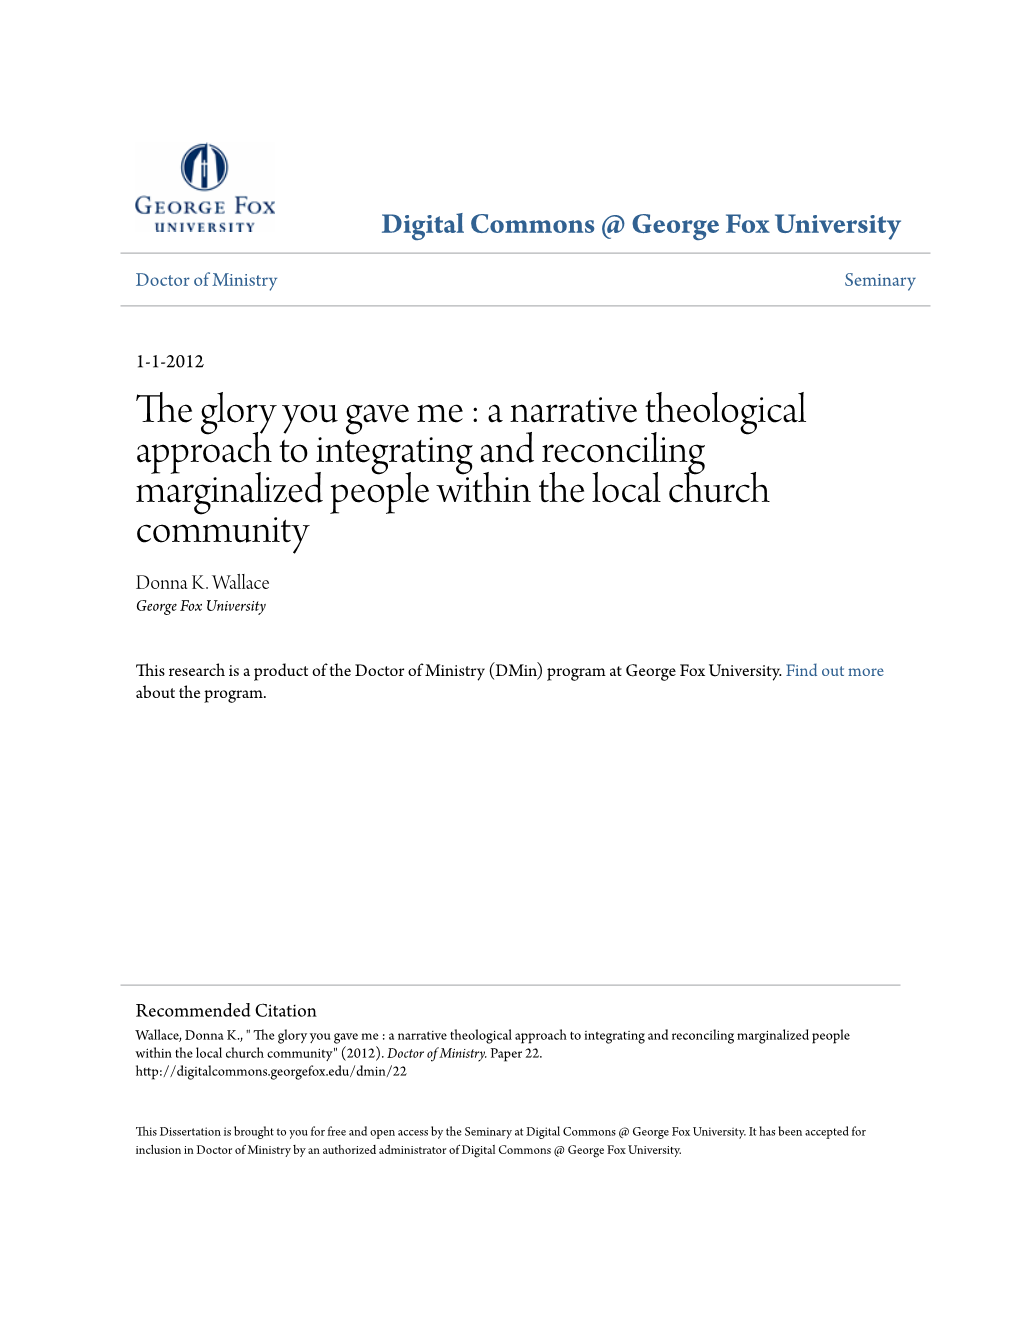 The Glory You Gave Me : a Narrative Theological Approach to Integrating and Reconciling Marginalized People Within the Local Church Community Donna K